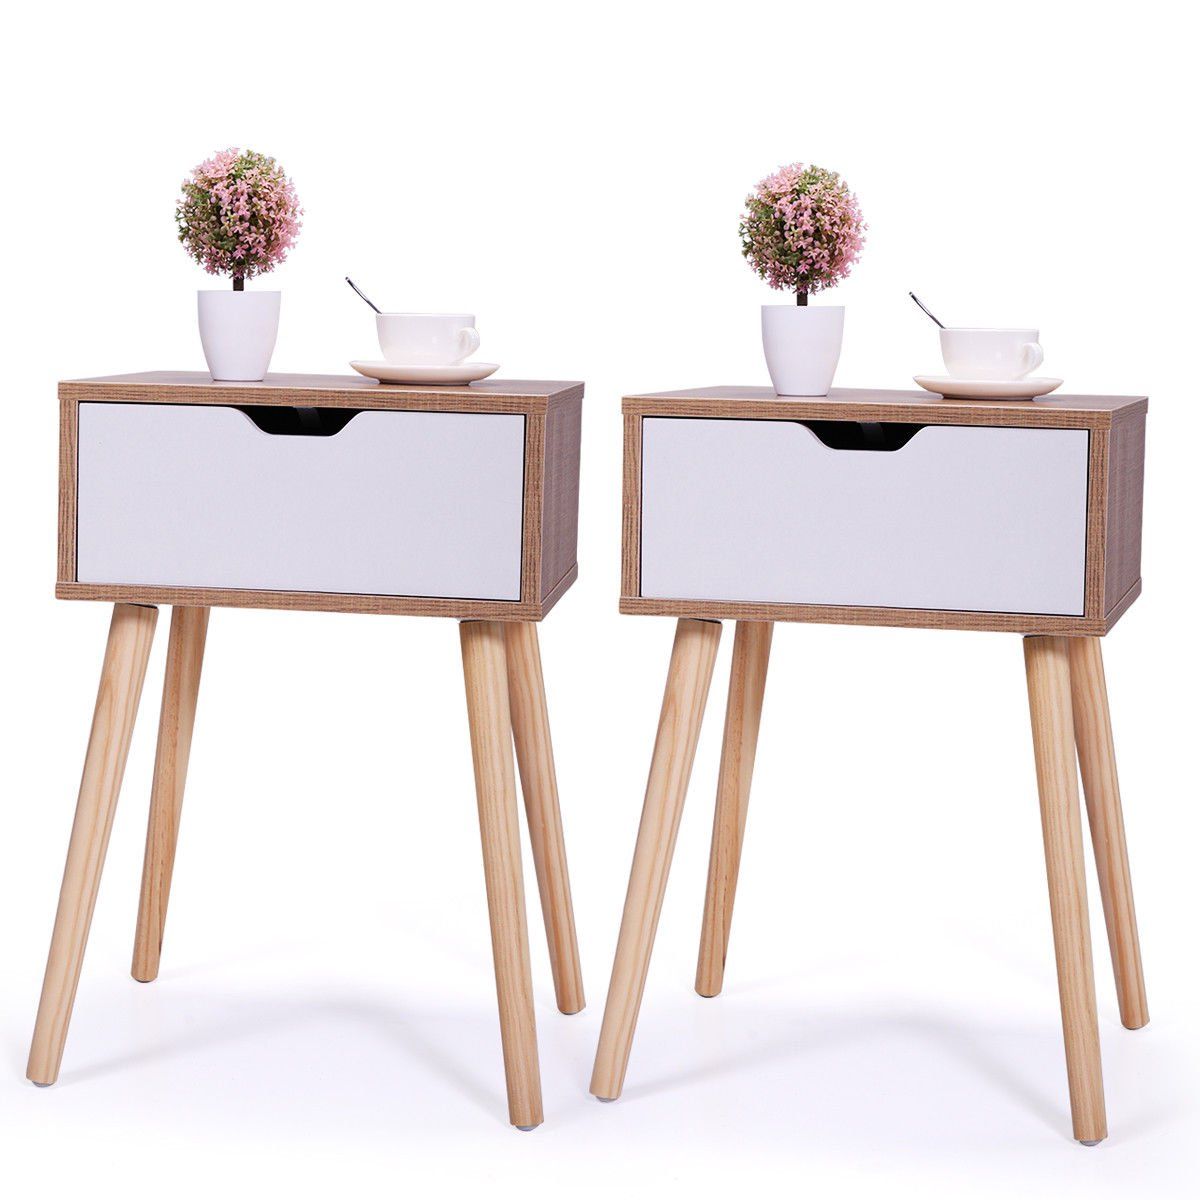 Topcobe Night Stand Set of 2, White End Table with Drawer, Modern Design Wood Leg Storage Cabinet... | Walmart (US)